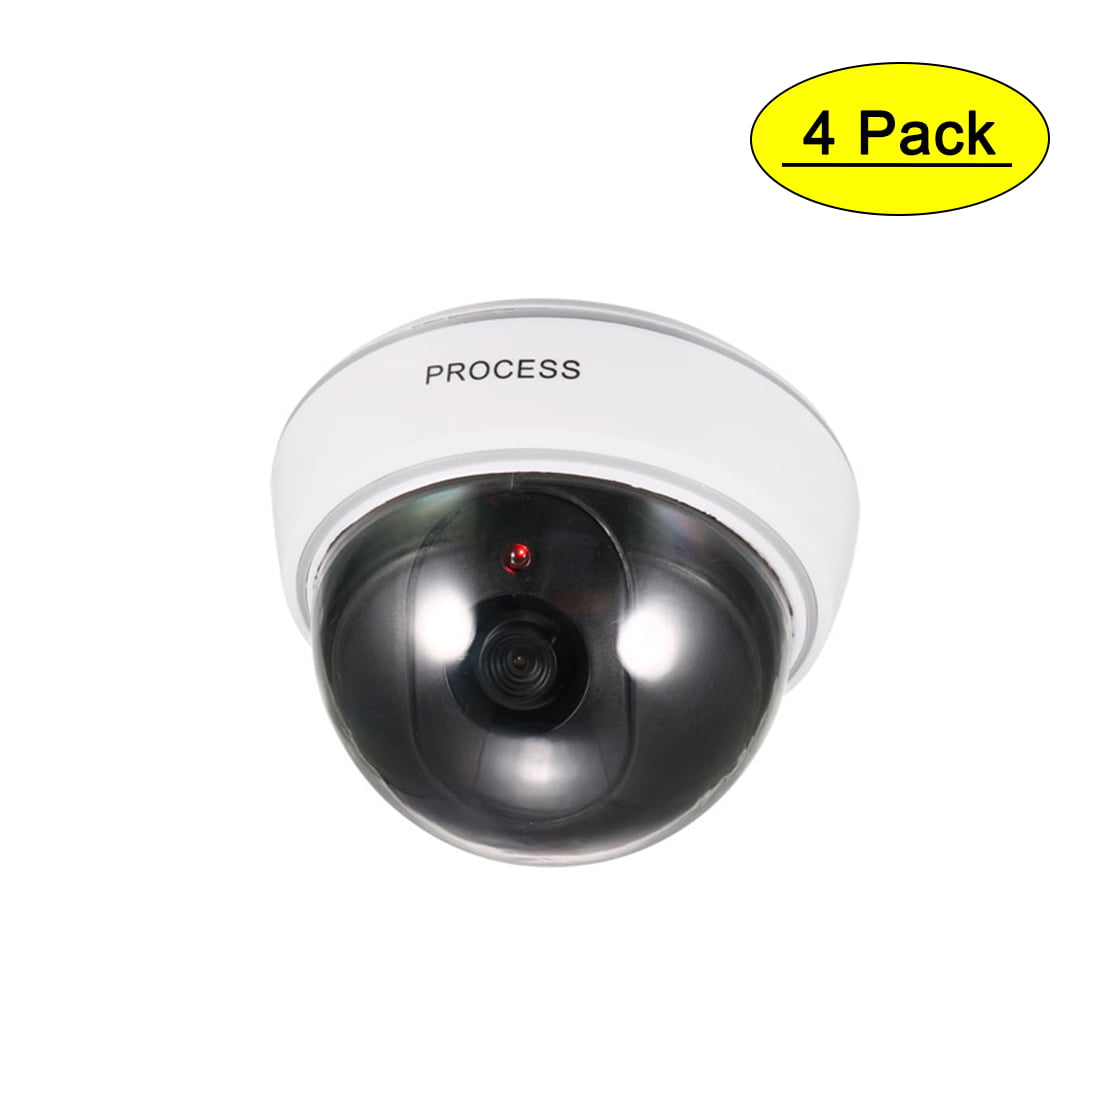 Dummy CCTV Dome Security Camera Flashing LED Indoor Outdoor X 2